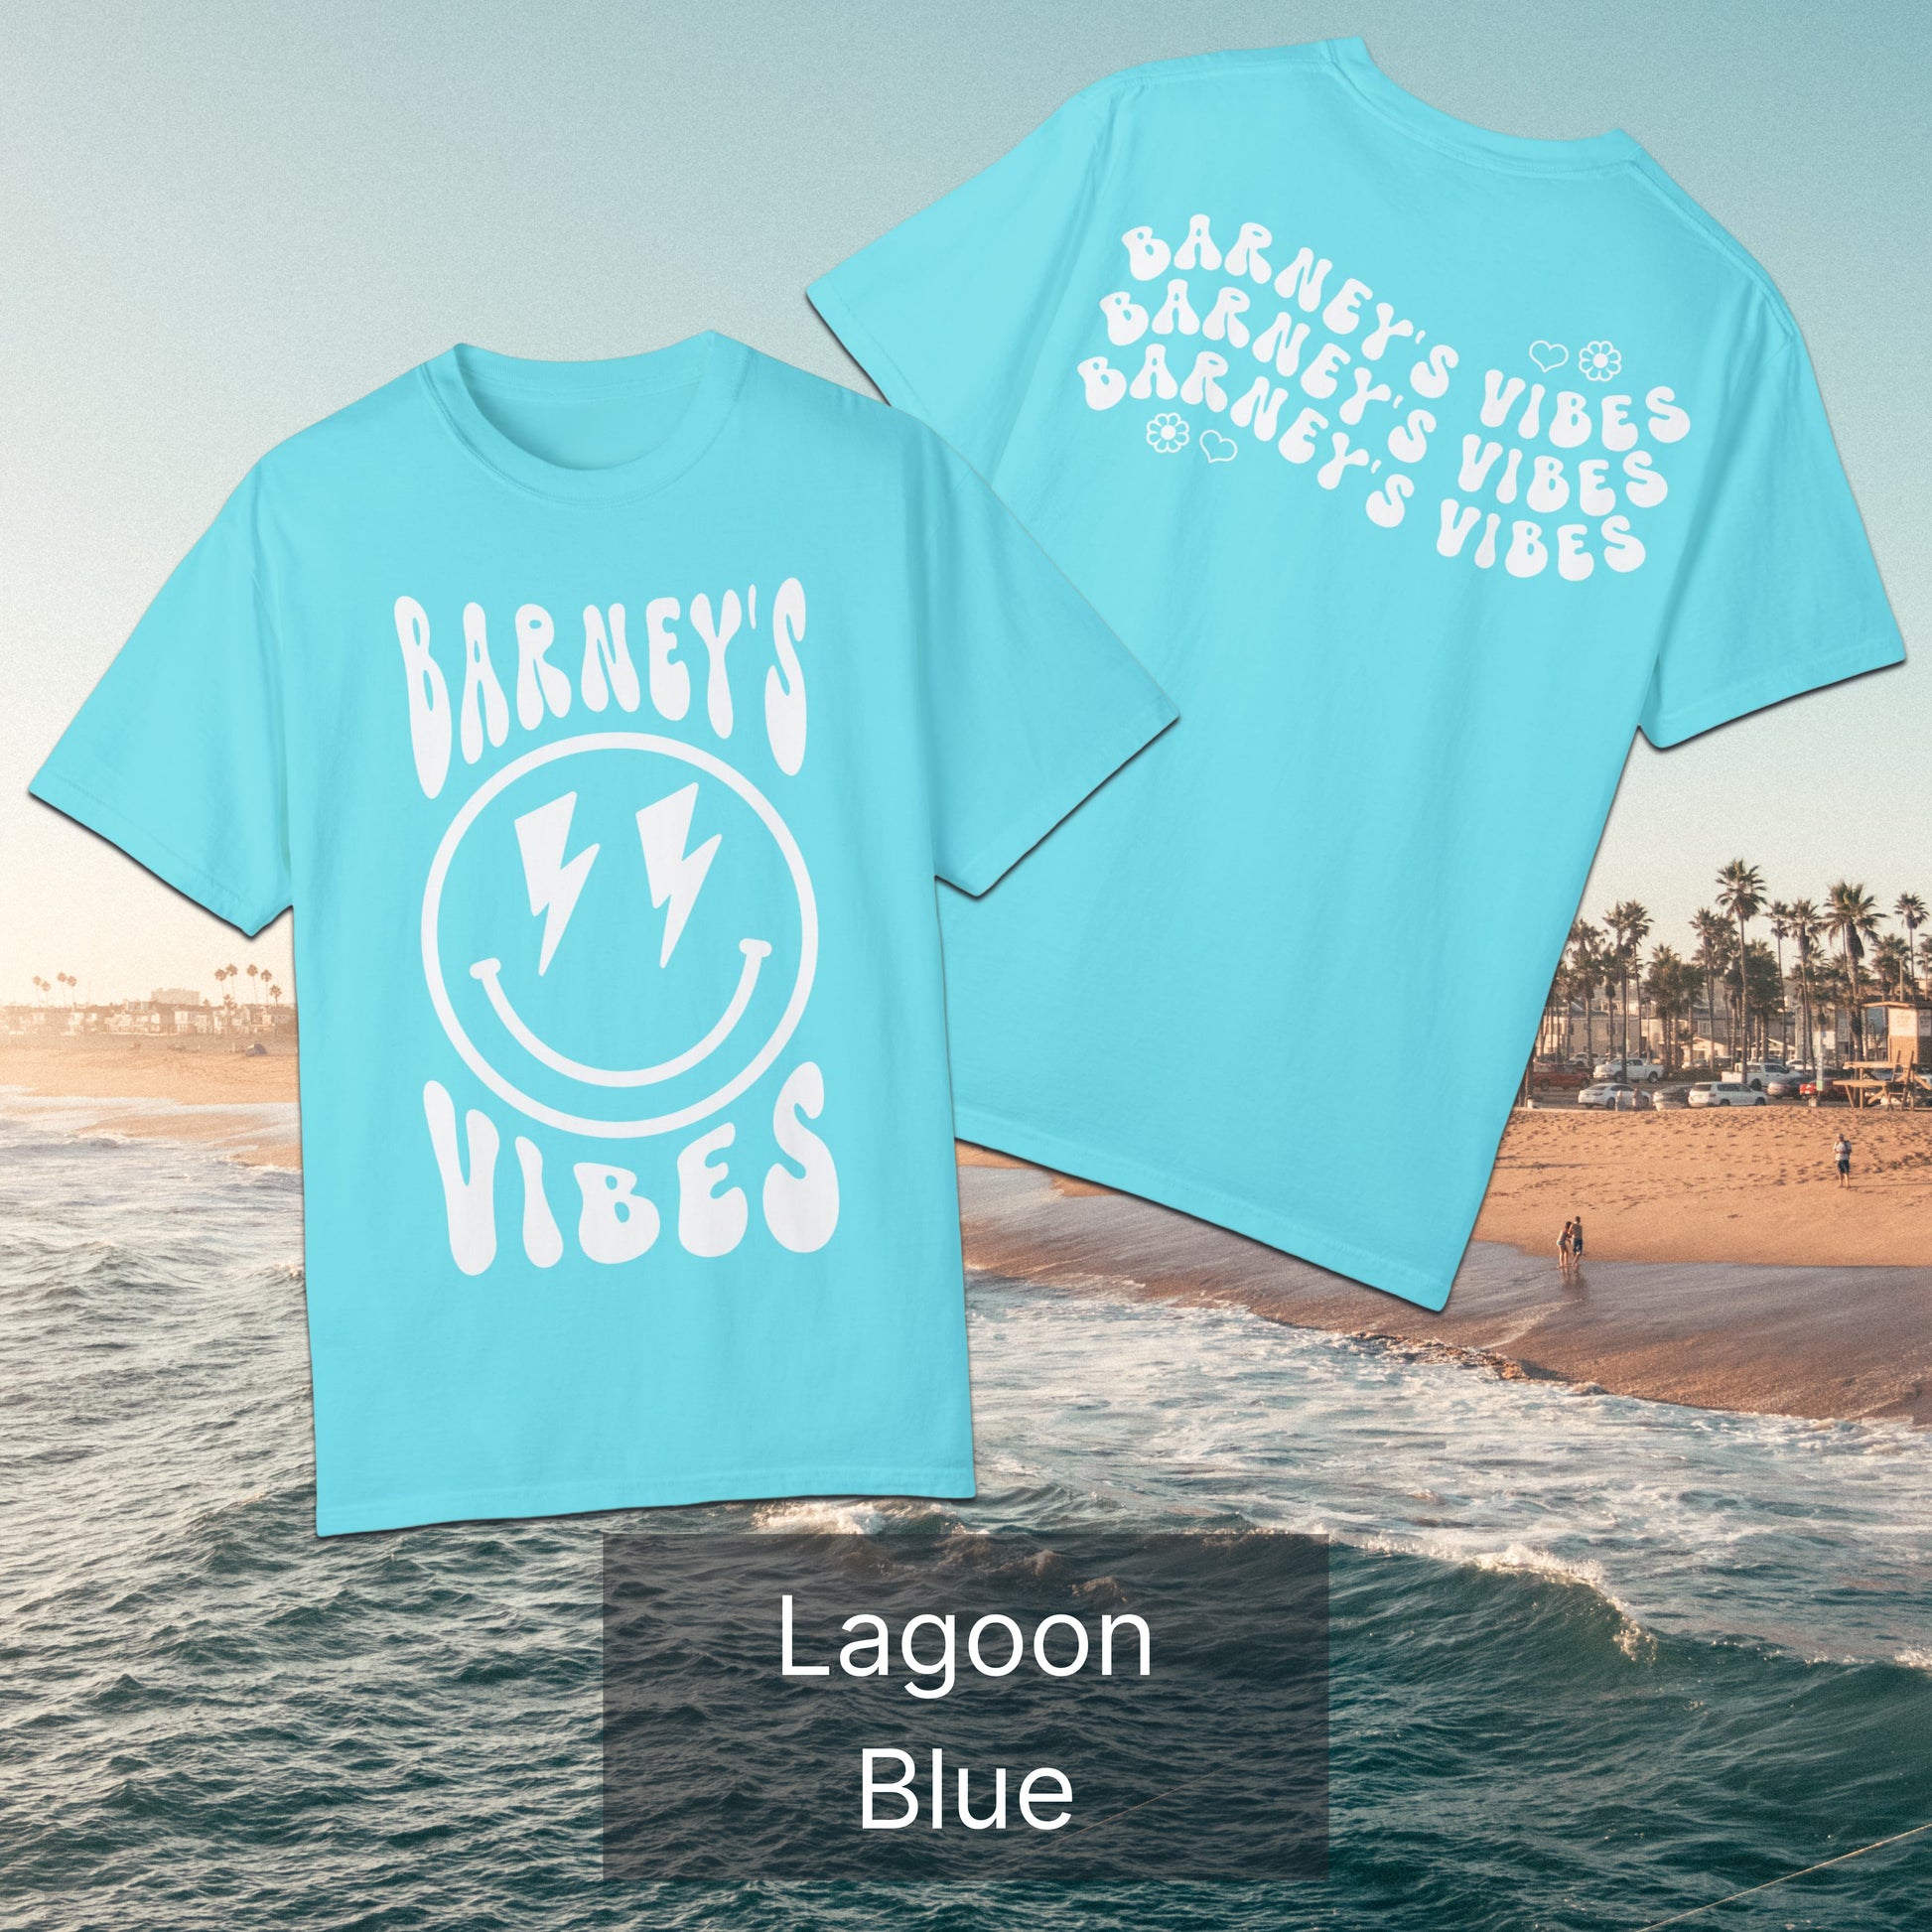 Barney's Vibes | BARNEY'S BEANERY - Women's Smiley Face Tee | White Graphics On Lagoon Blue T-Shirt, Front And Back Flat Lay View